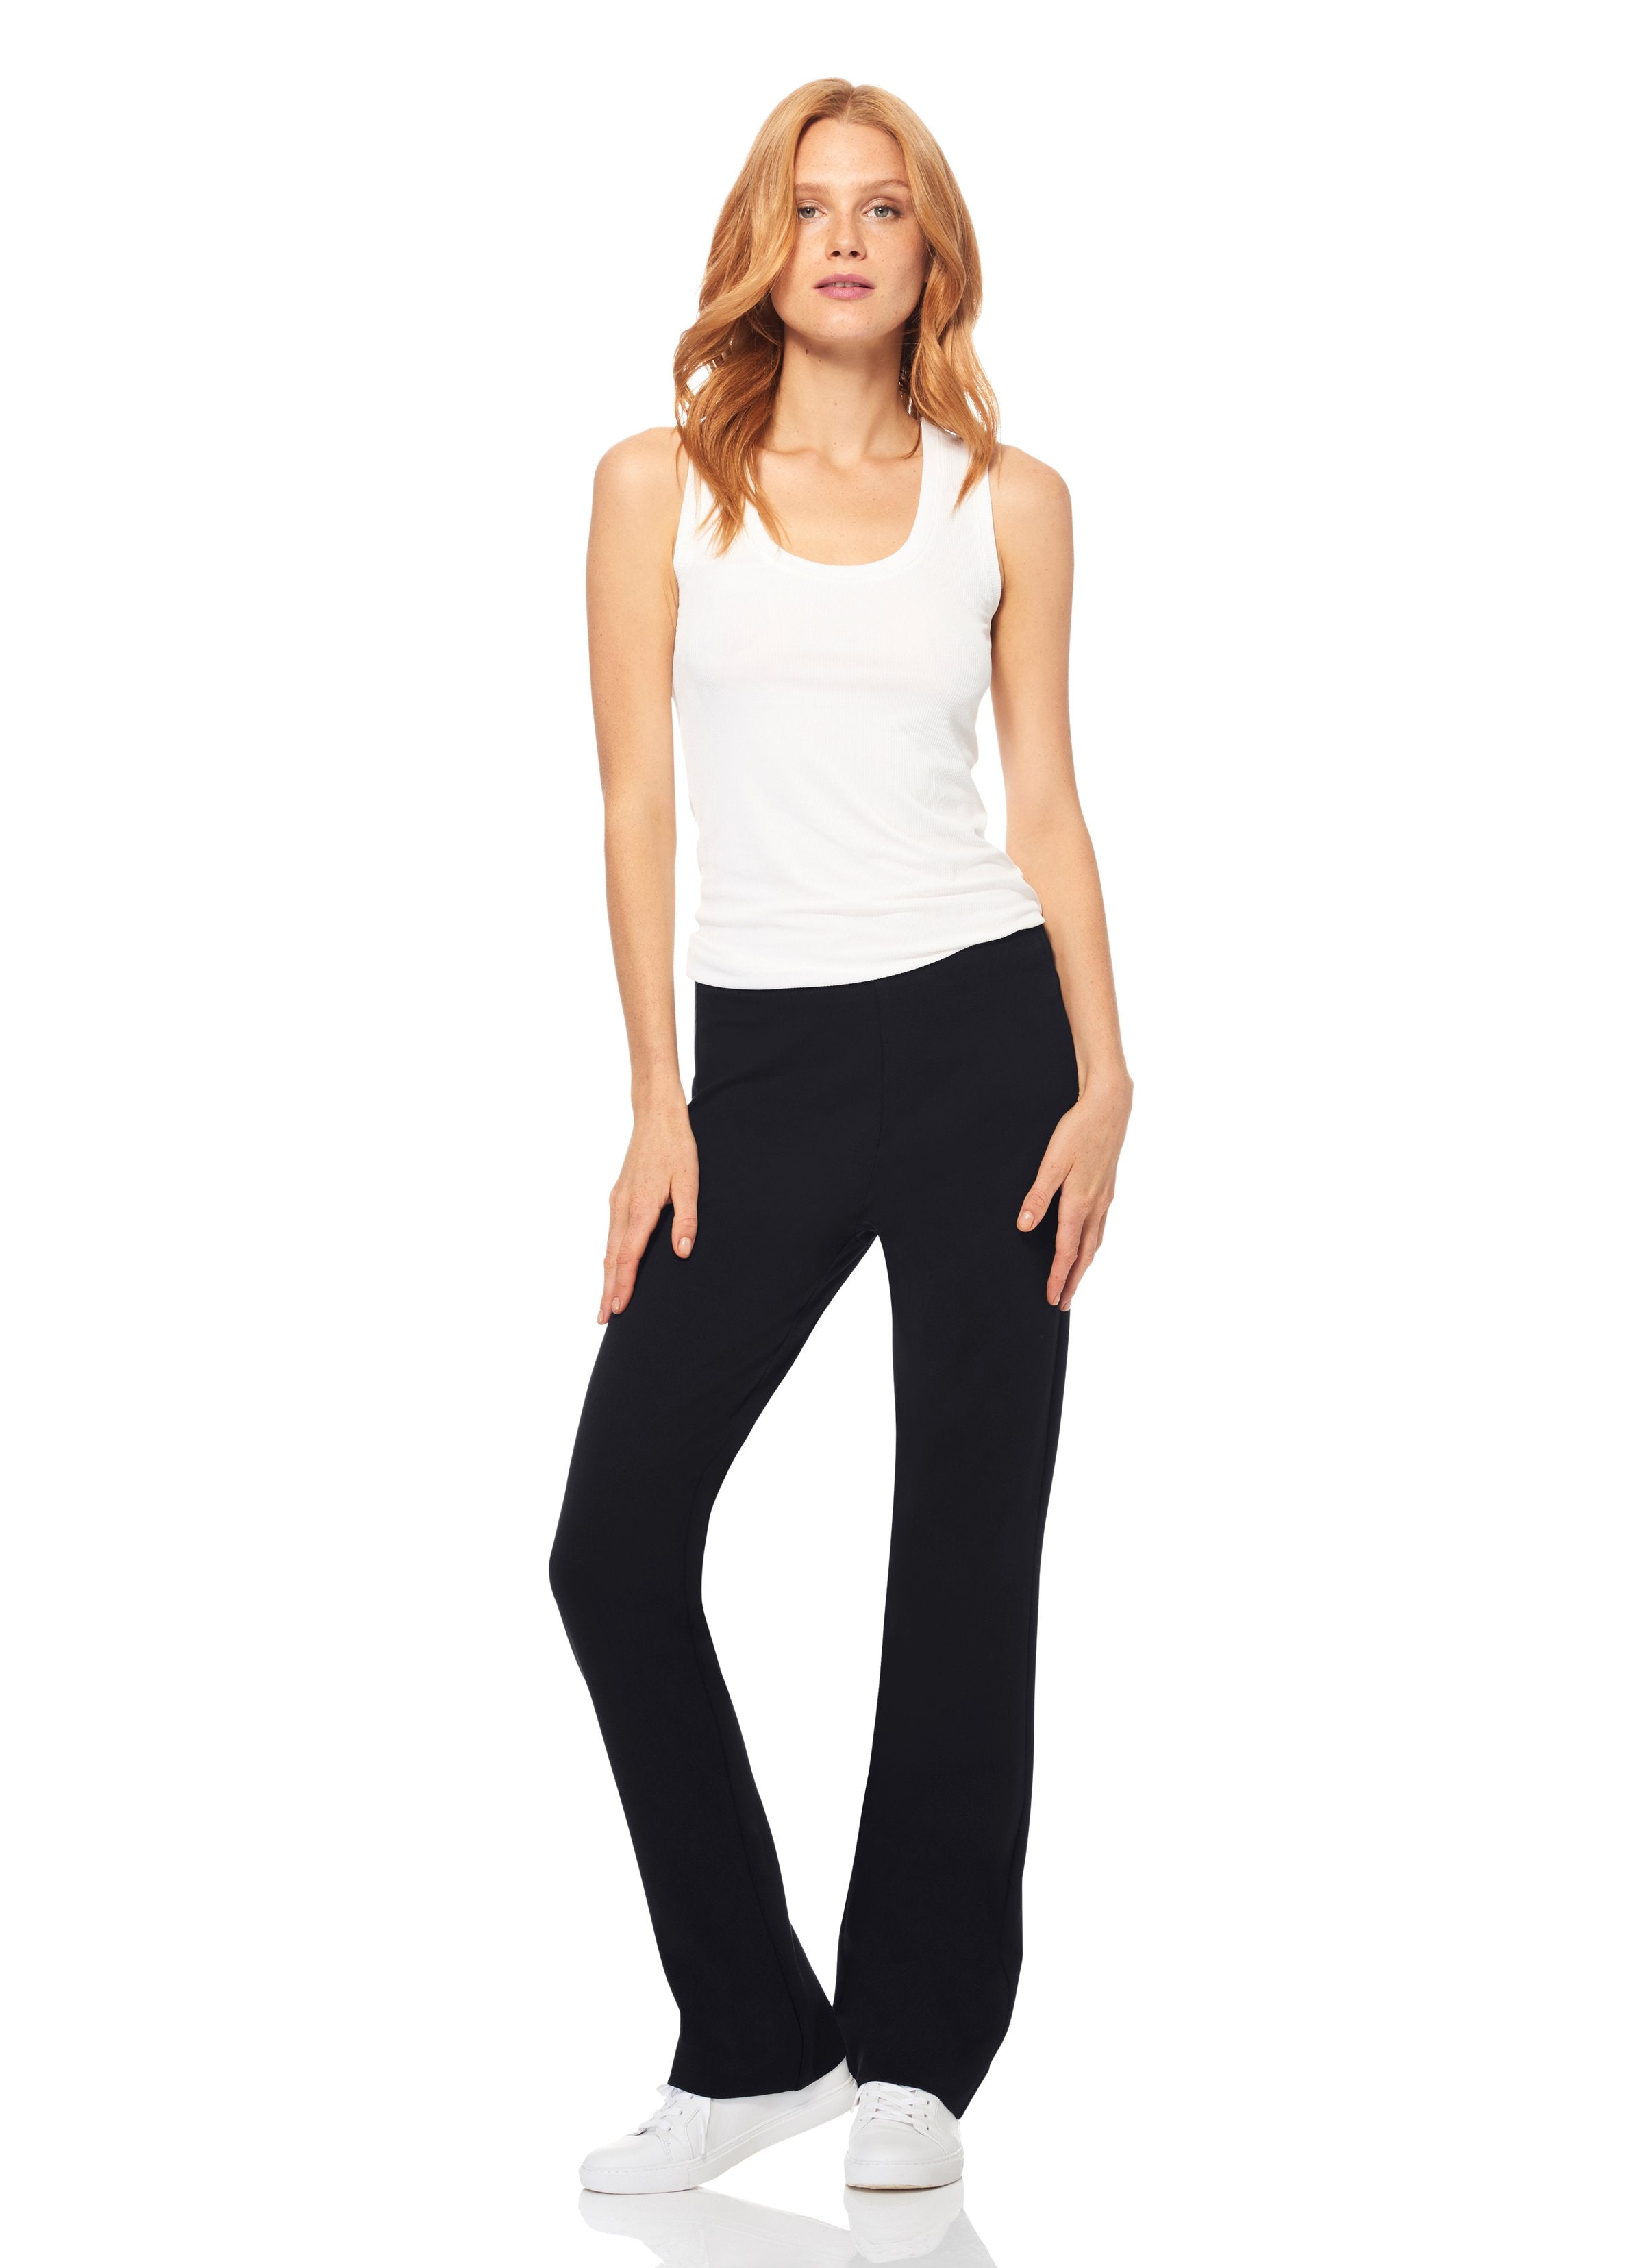 Ecru Navy New Sia Ponte pant found at PATRICIA in Southern Pines, NC